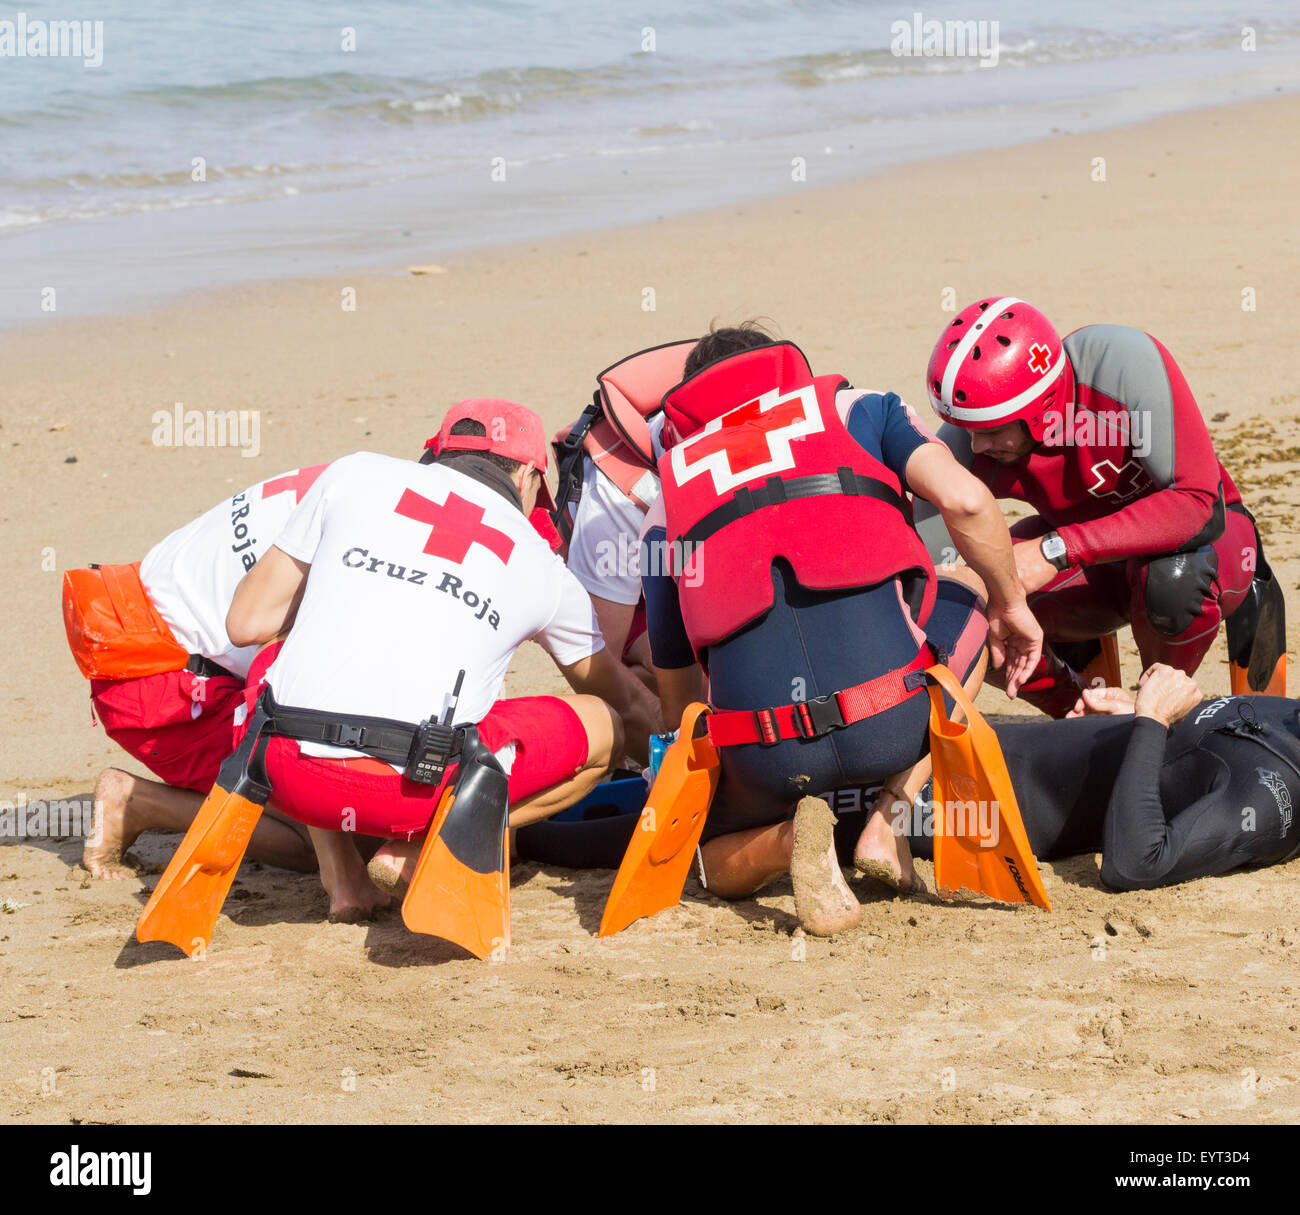 Red Cross Lifeguards and rescue services rescue simulation on beach in Spain Stock Photo